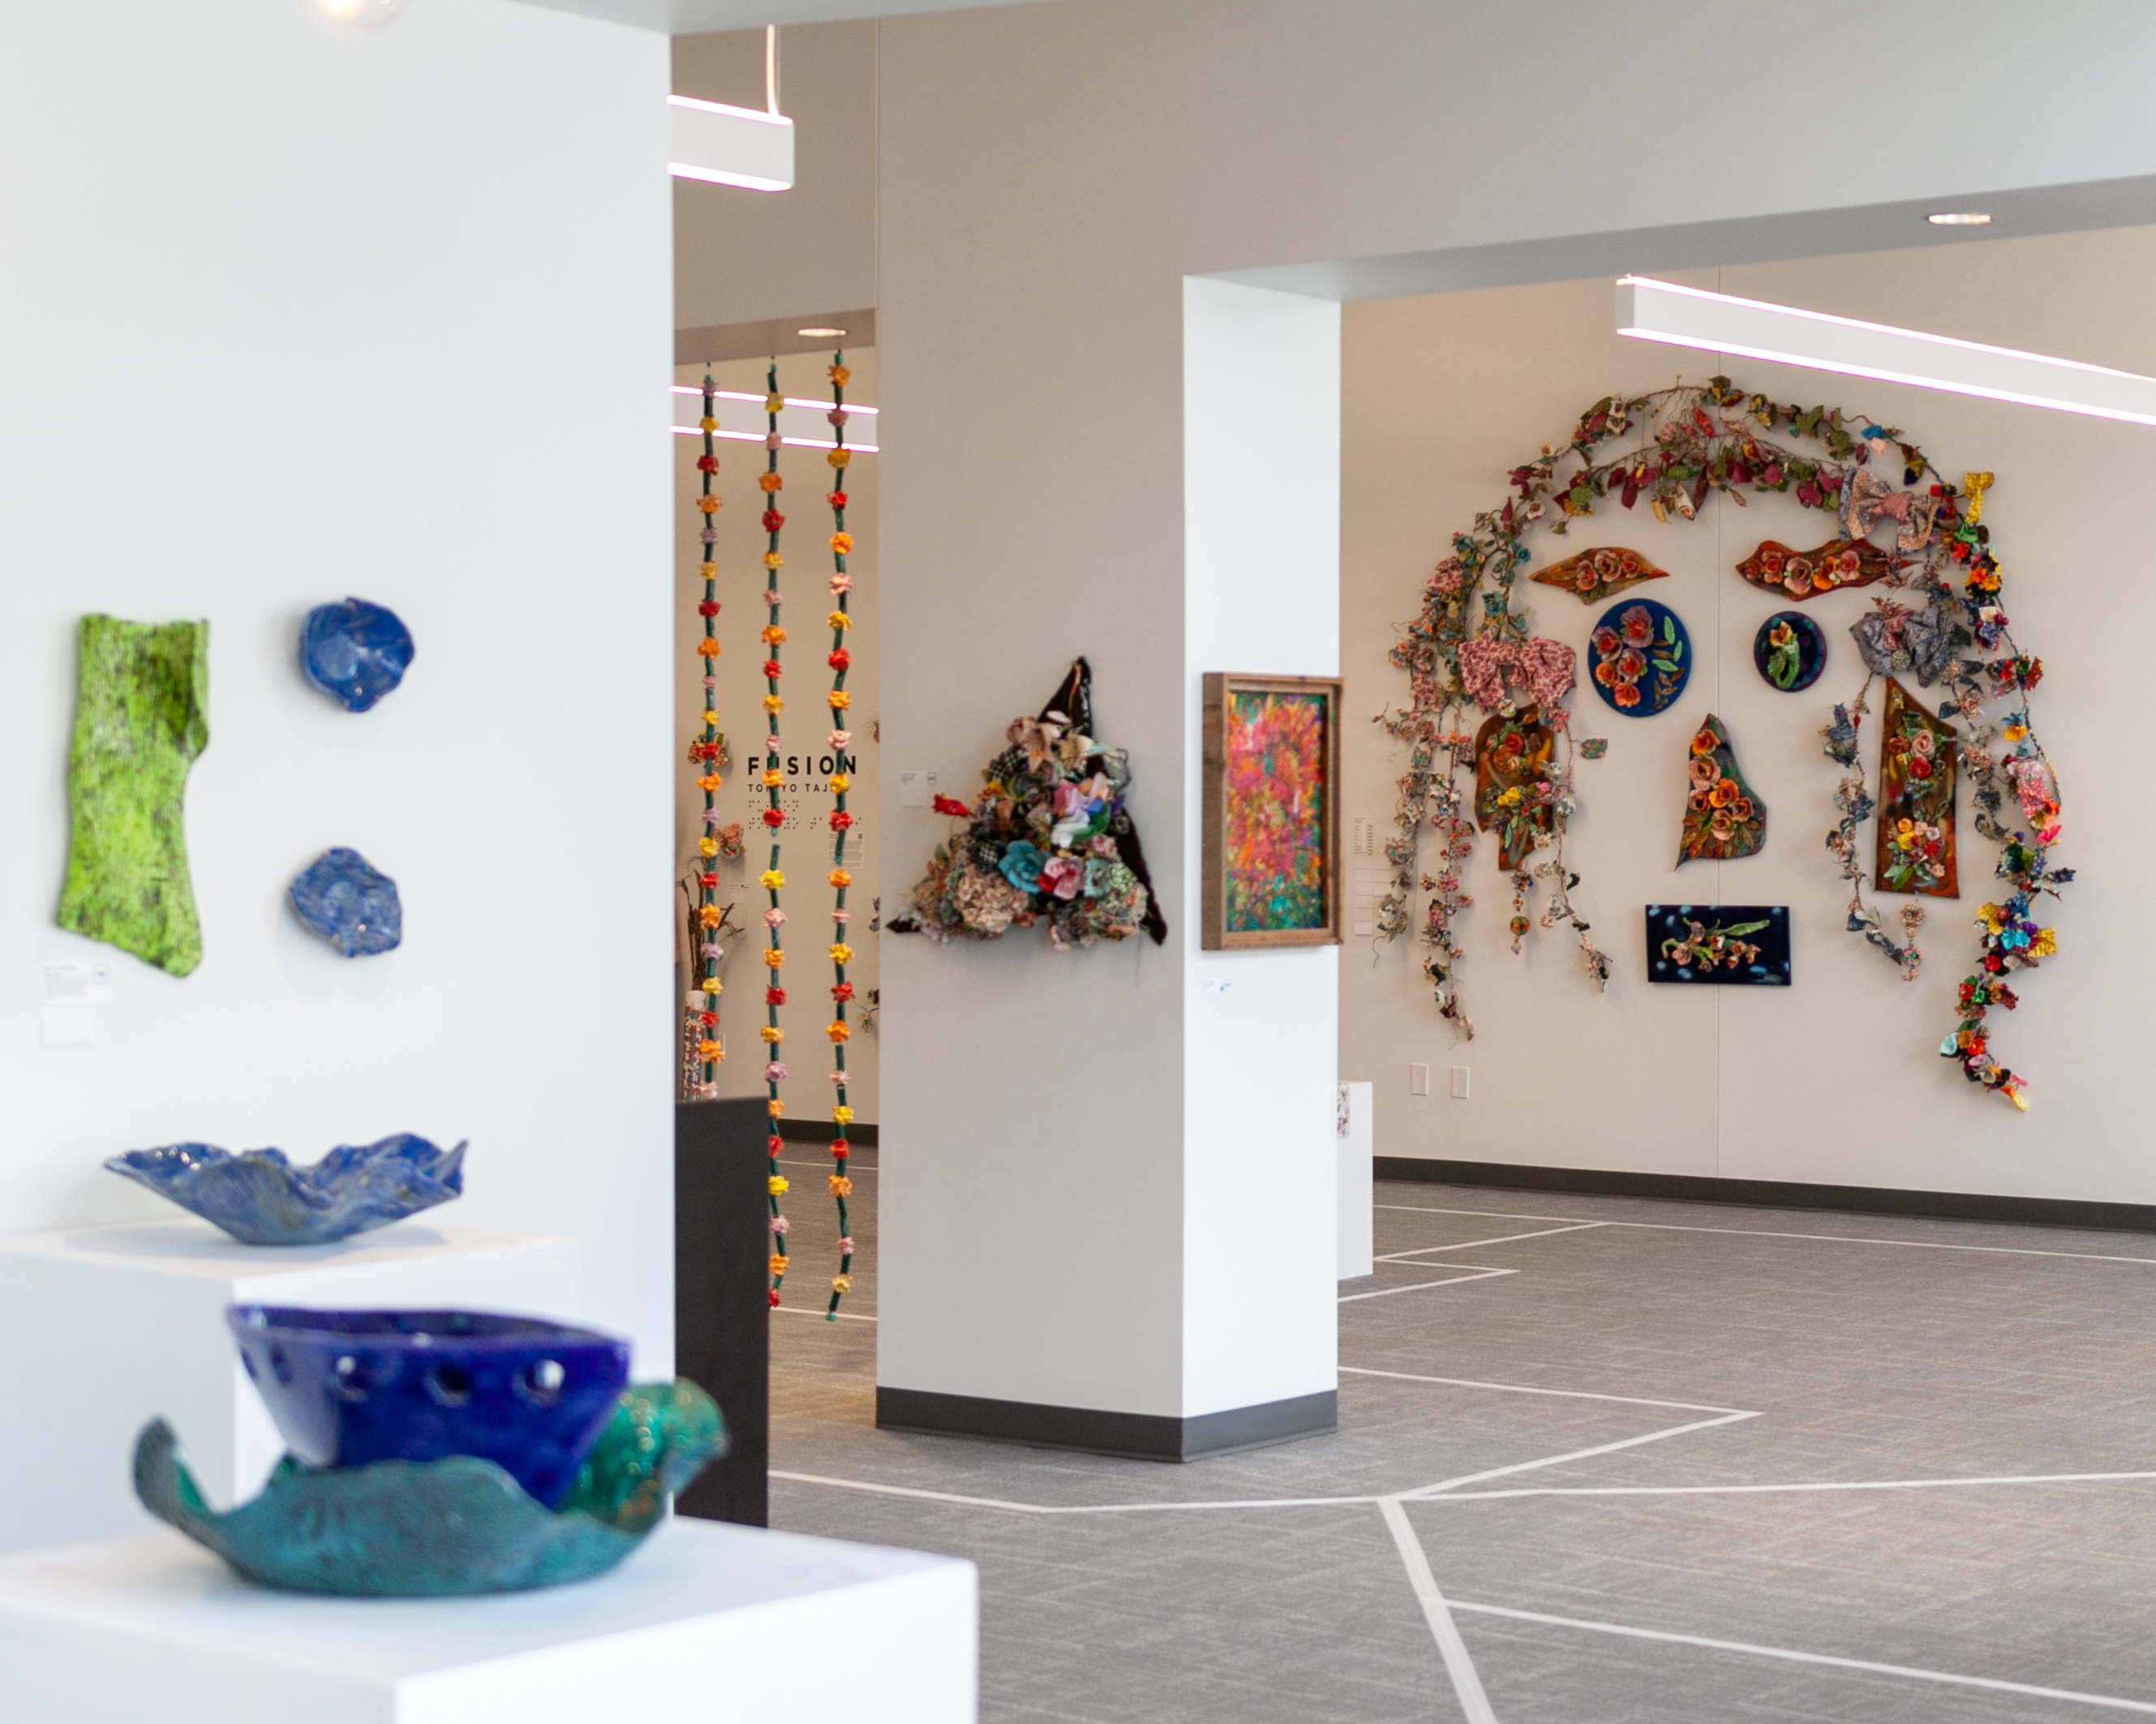 This image looks into the Envision Arts Gallery from the Patricia A. Window Gallery where Erica Johnson's exhibition Memory of Waves is on display. Several ceramic art pieces can be seen on pedestals and hung on the wall. In the background, Tomiyo Tajiri's exhibition titled Fusion can be seen